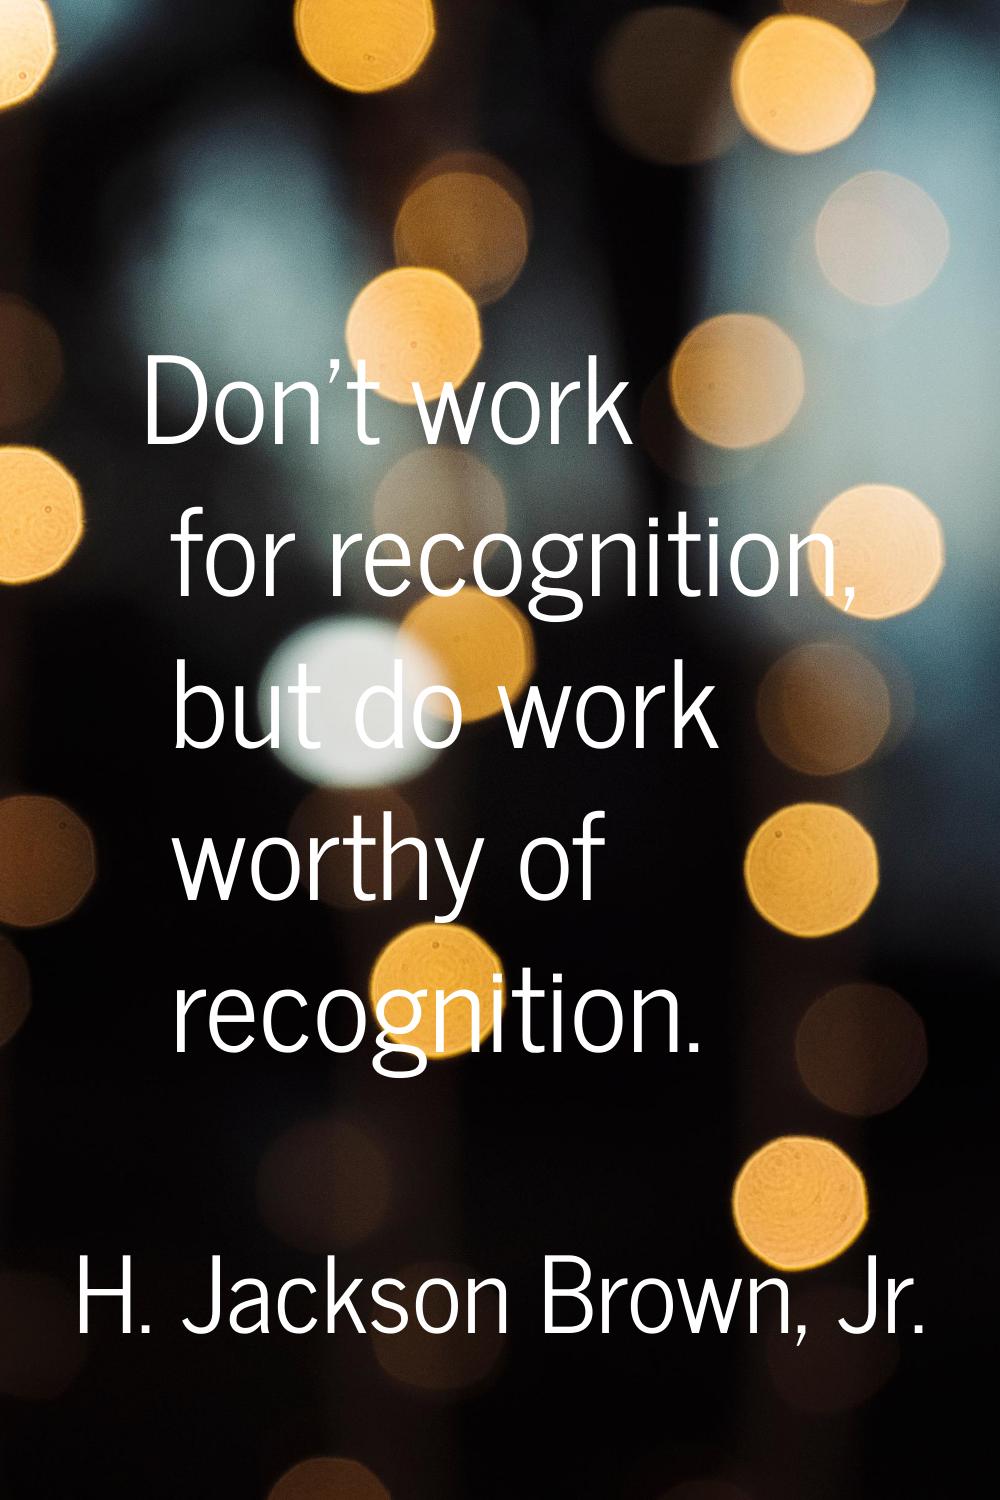 Don't work for recognition, but do work worthy of recognition.